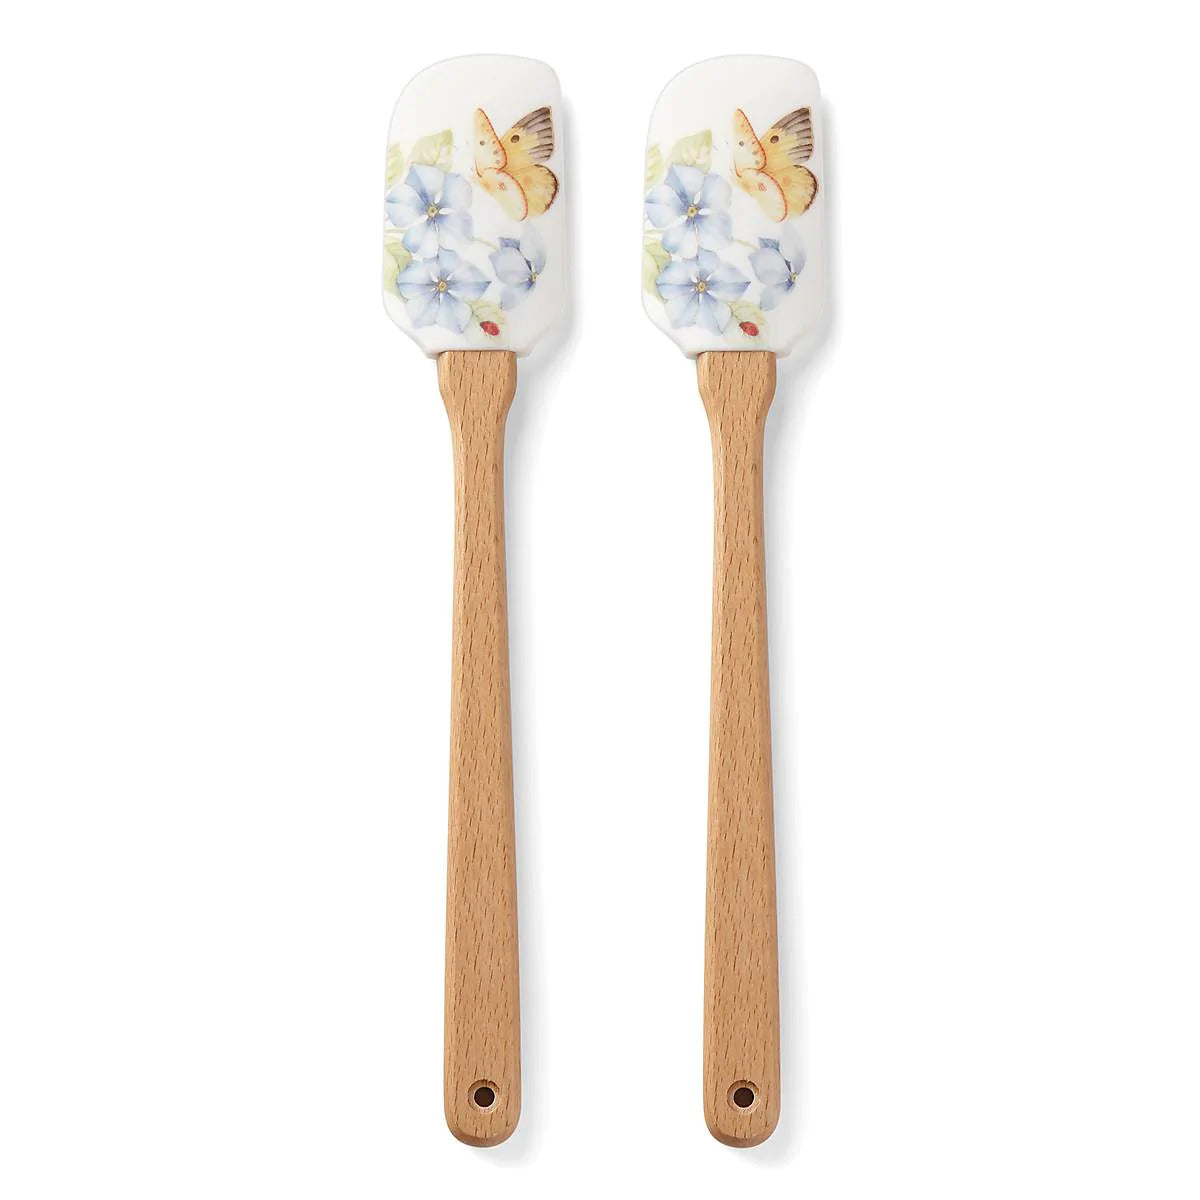 Lenox Butterfly Meadow spatula pair - Royal Gift